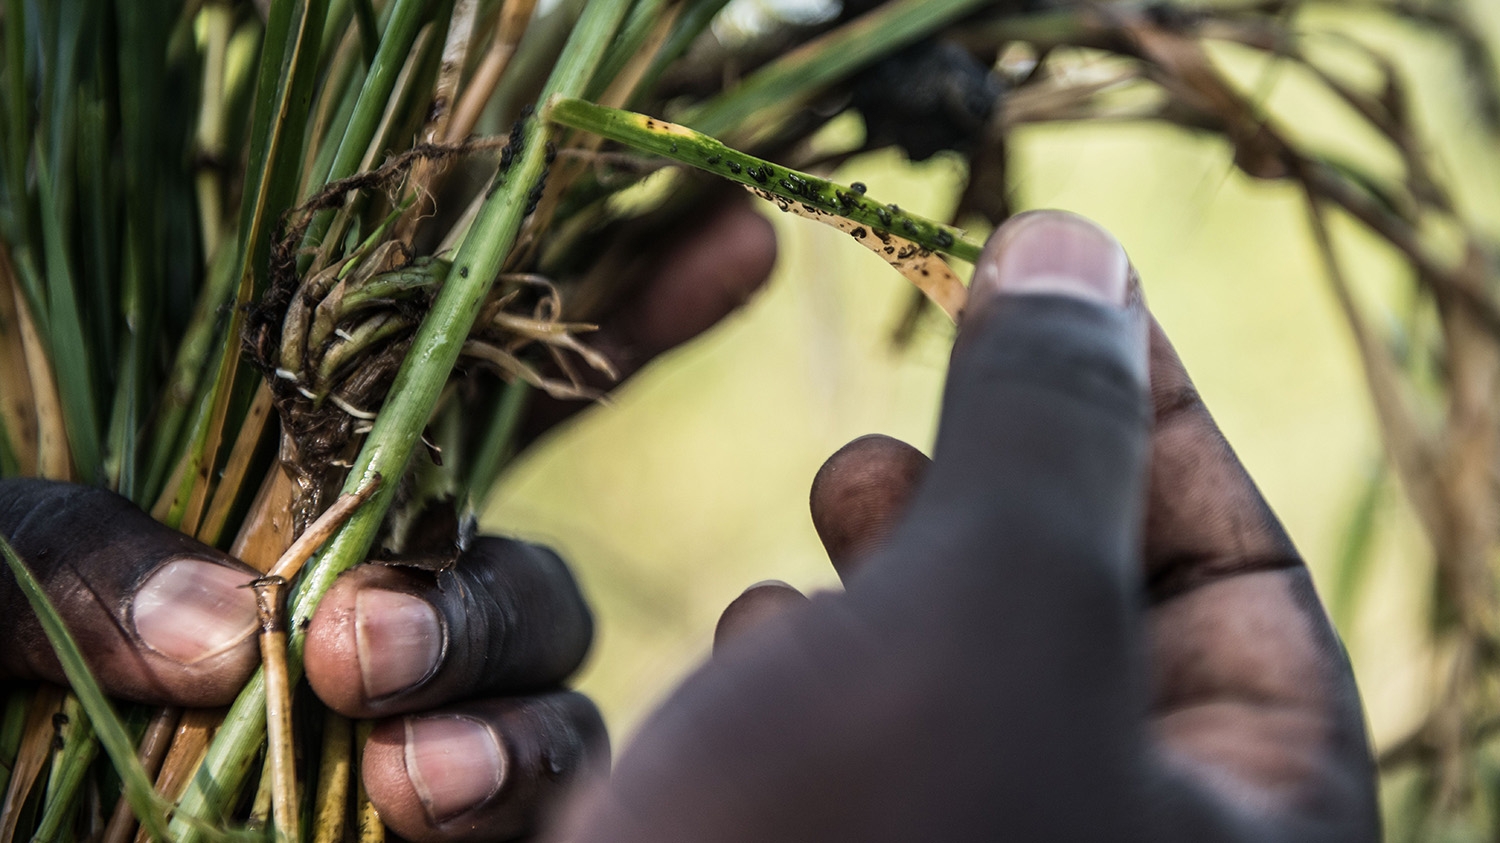 A close-up of man's hands examining grass for black flies which spread river blindness.